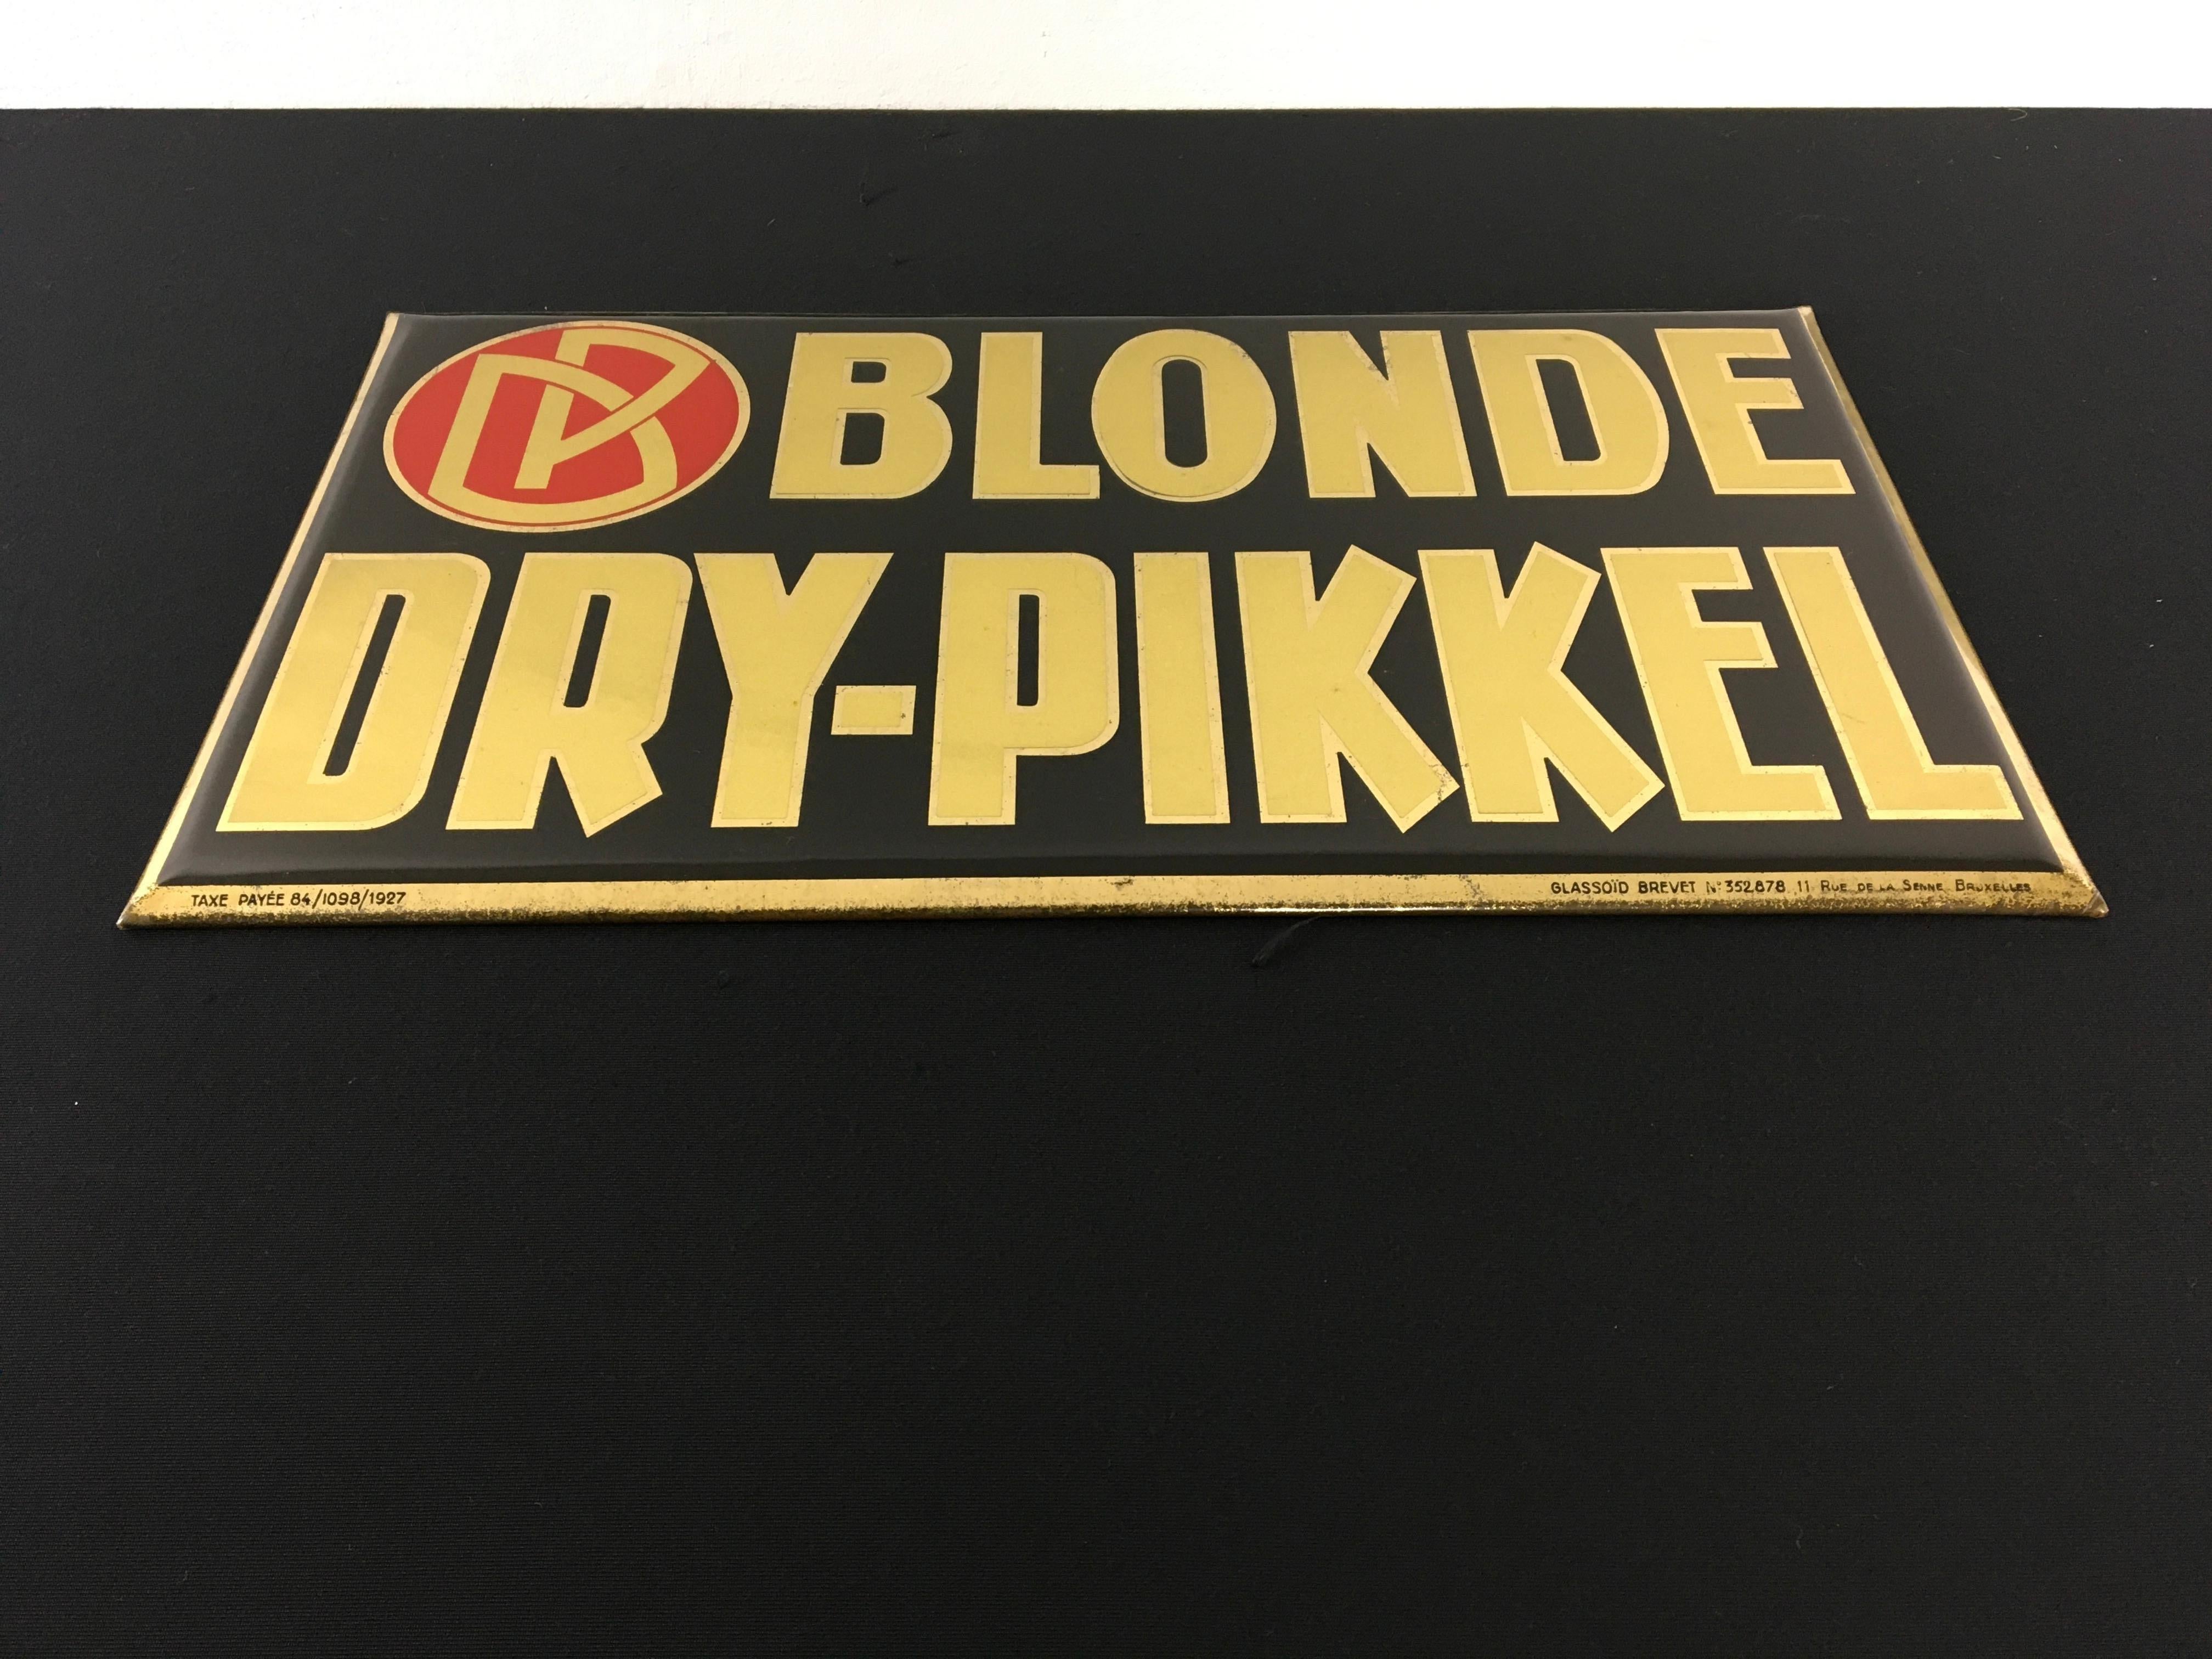 Black and gold 1920s sign for Belgian Beer - dated 1927.
A late Art Nouveau - Early Art Deco advertising sign for Belgian Beer.
This antique shop display or shop sign was made for Blonde Dry-Pikkel, a blond Belgian Beer - beer from Belgium.

This